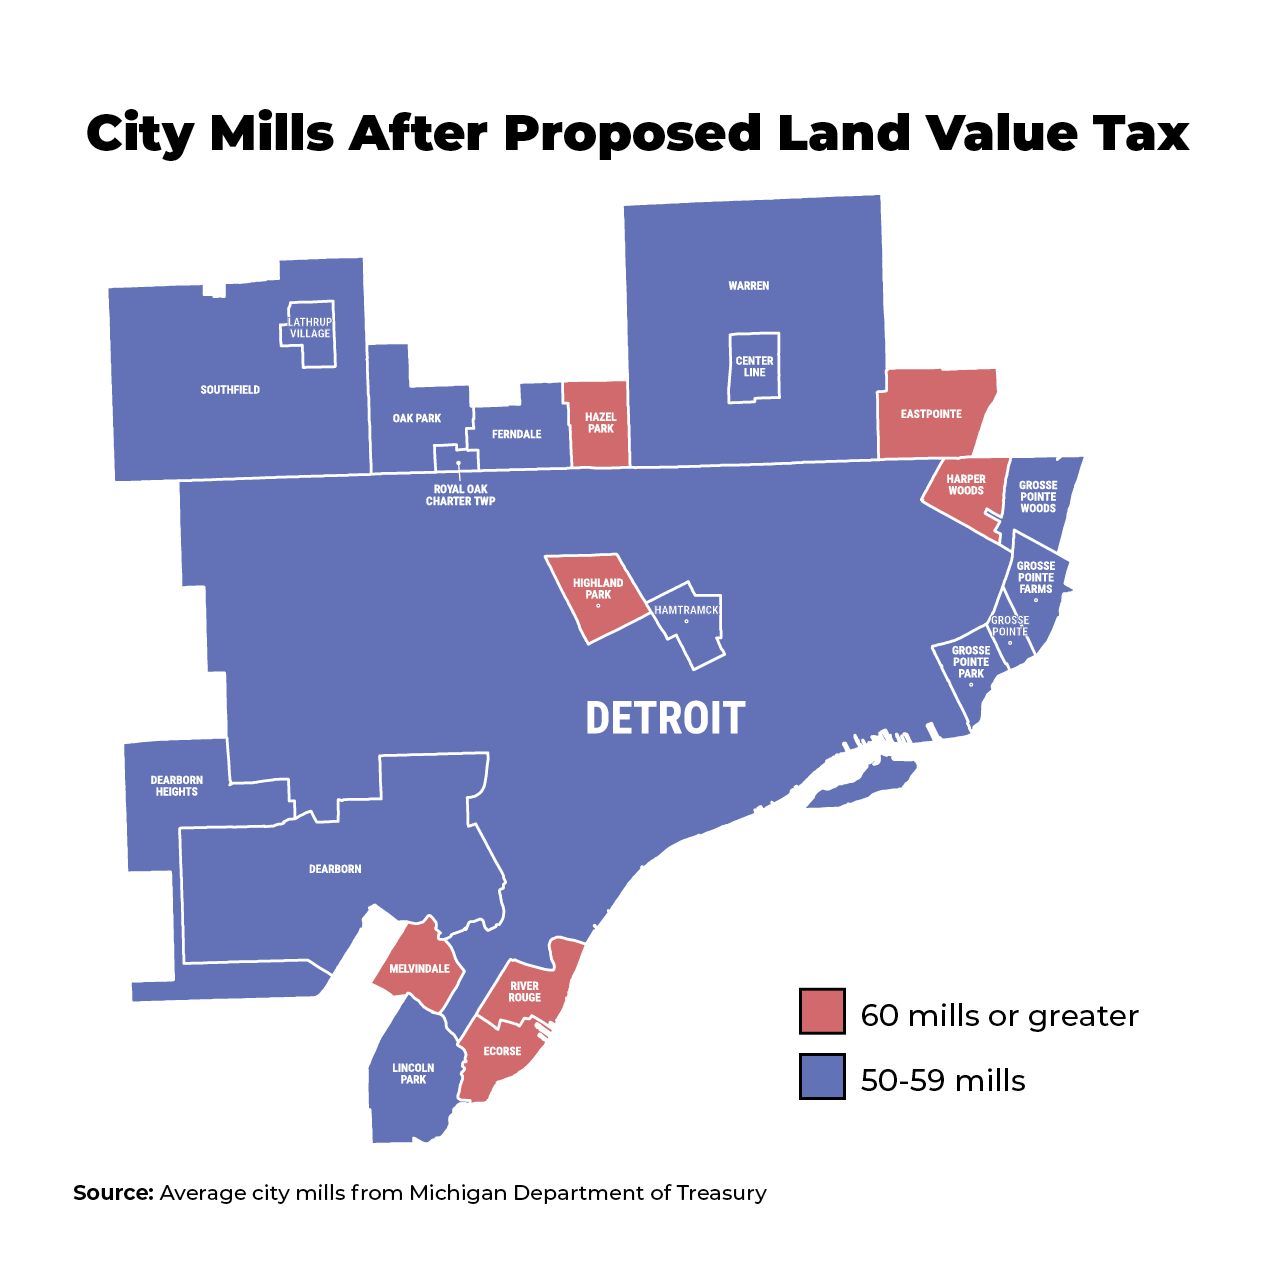 UPDATED Land Value Tax Regional Maps-After